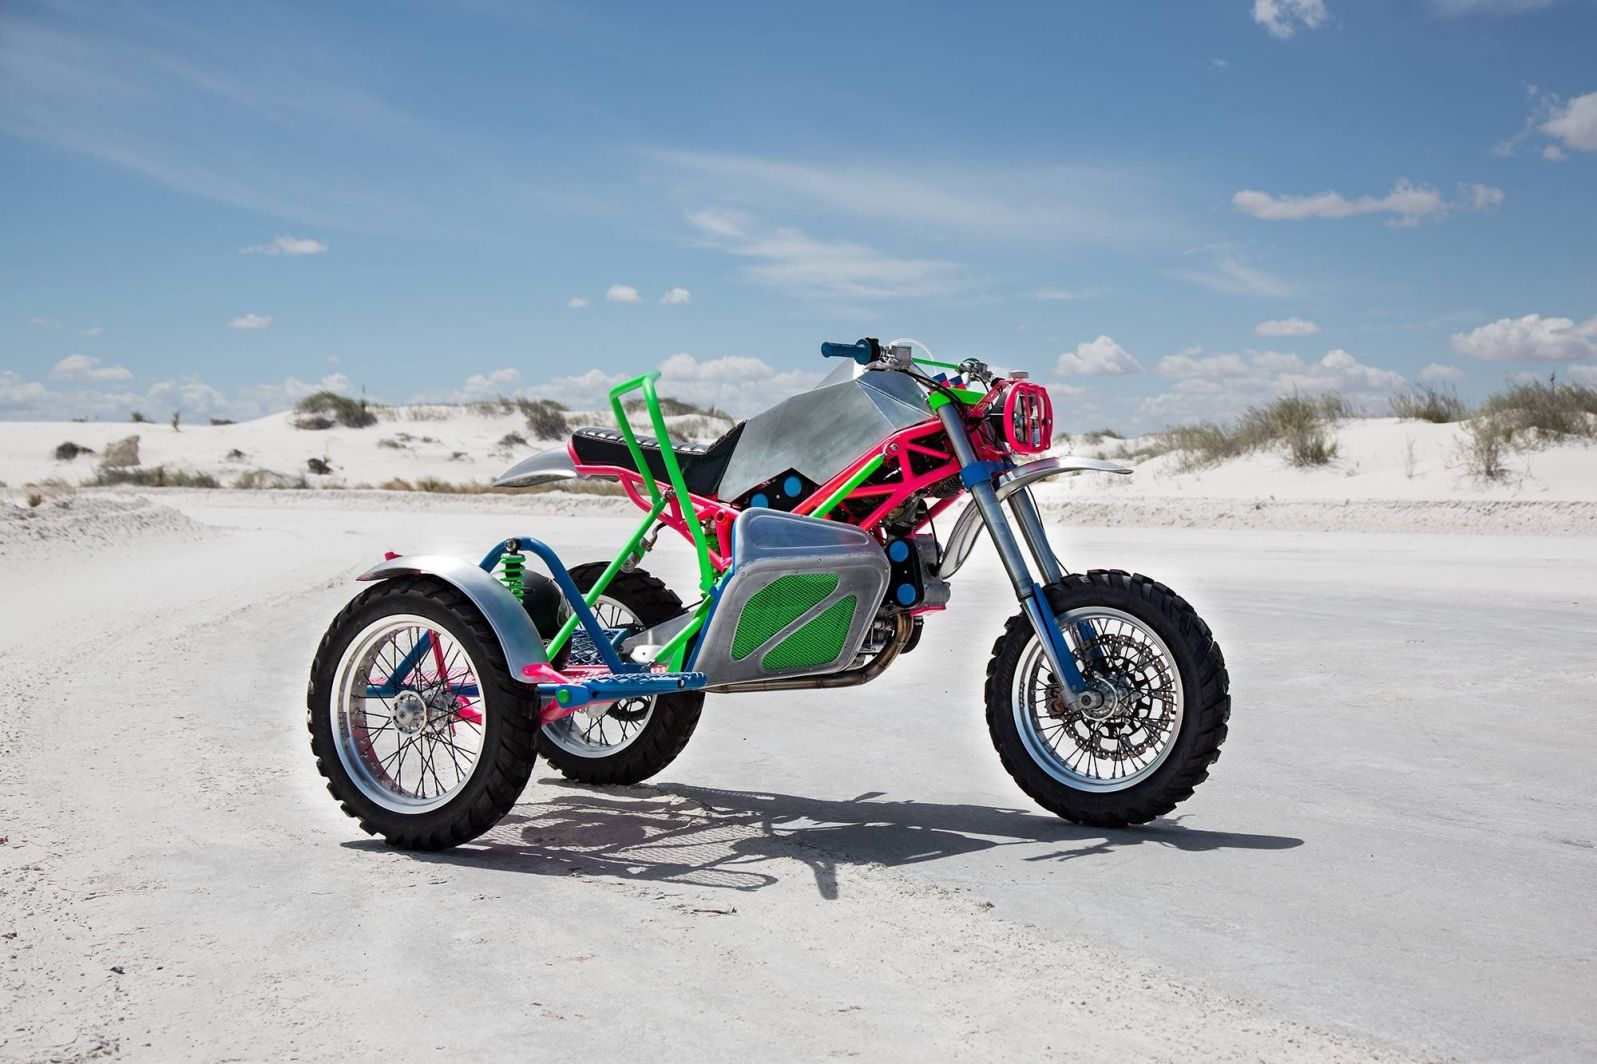 Revival Cycles Converted This Ducati  ST4 Into a Wild 